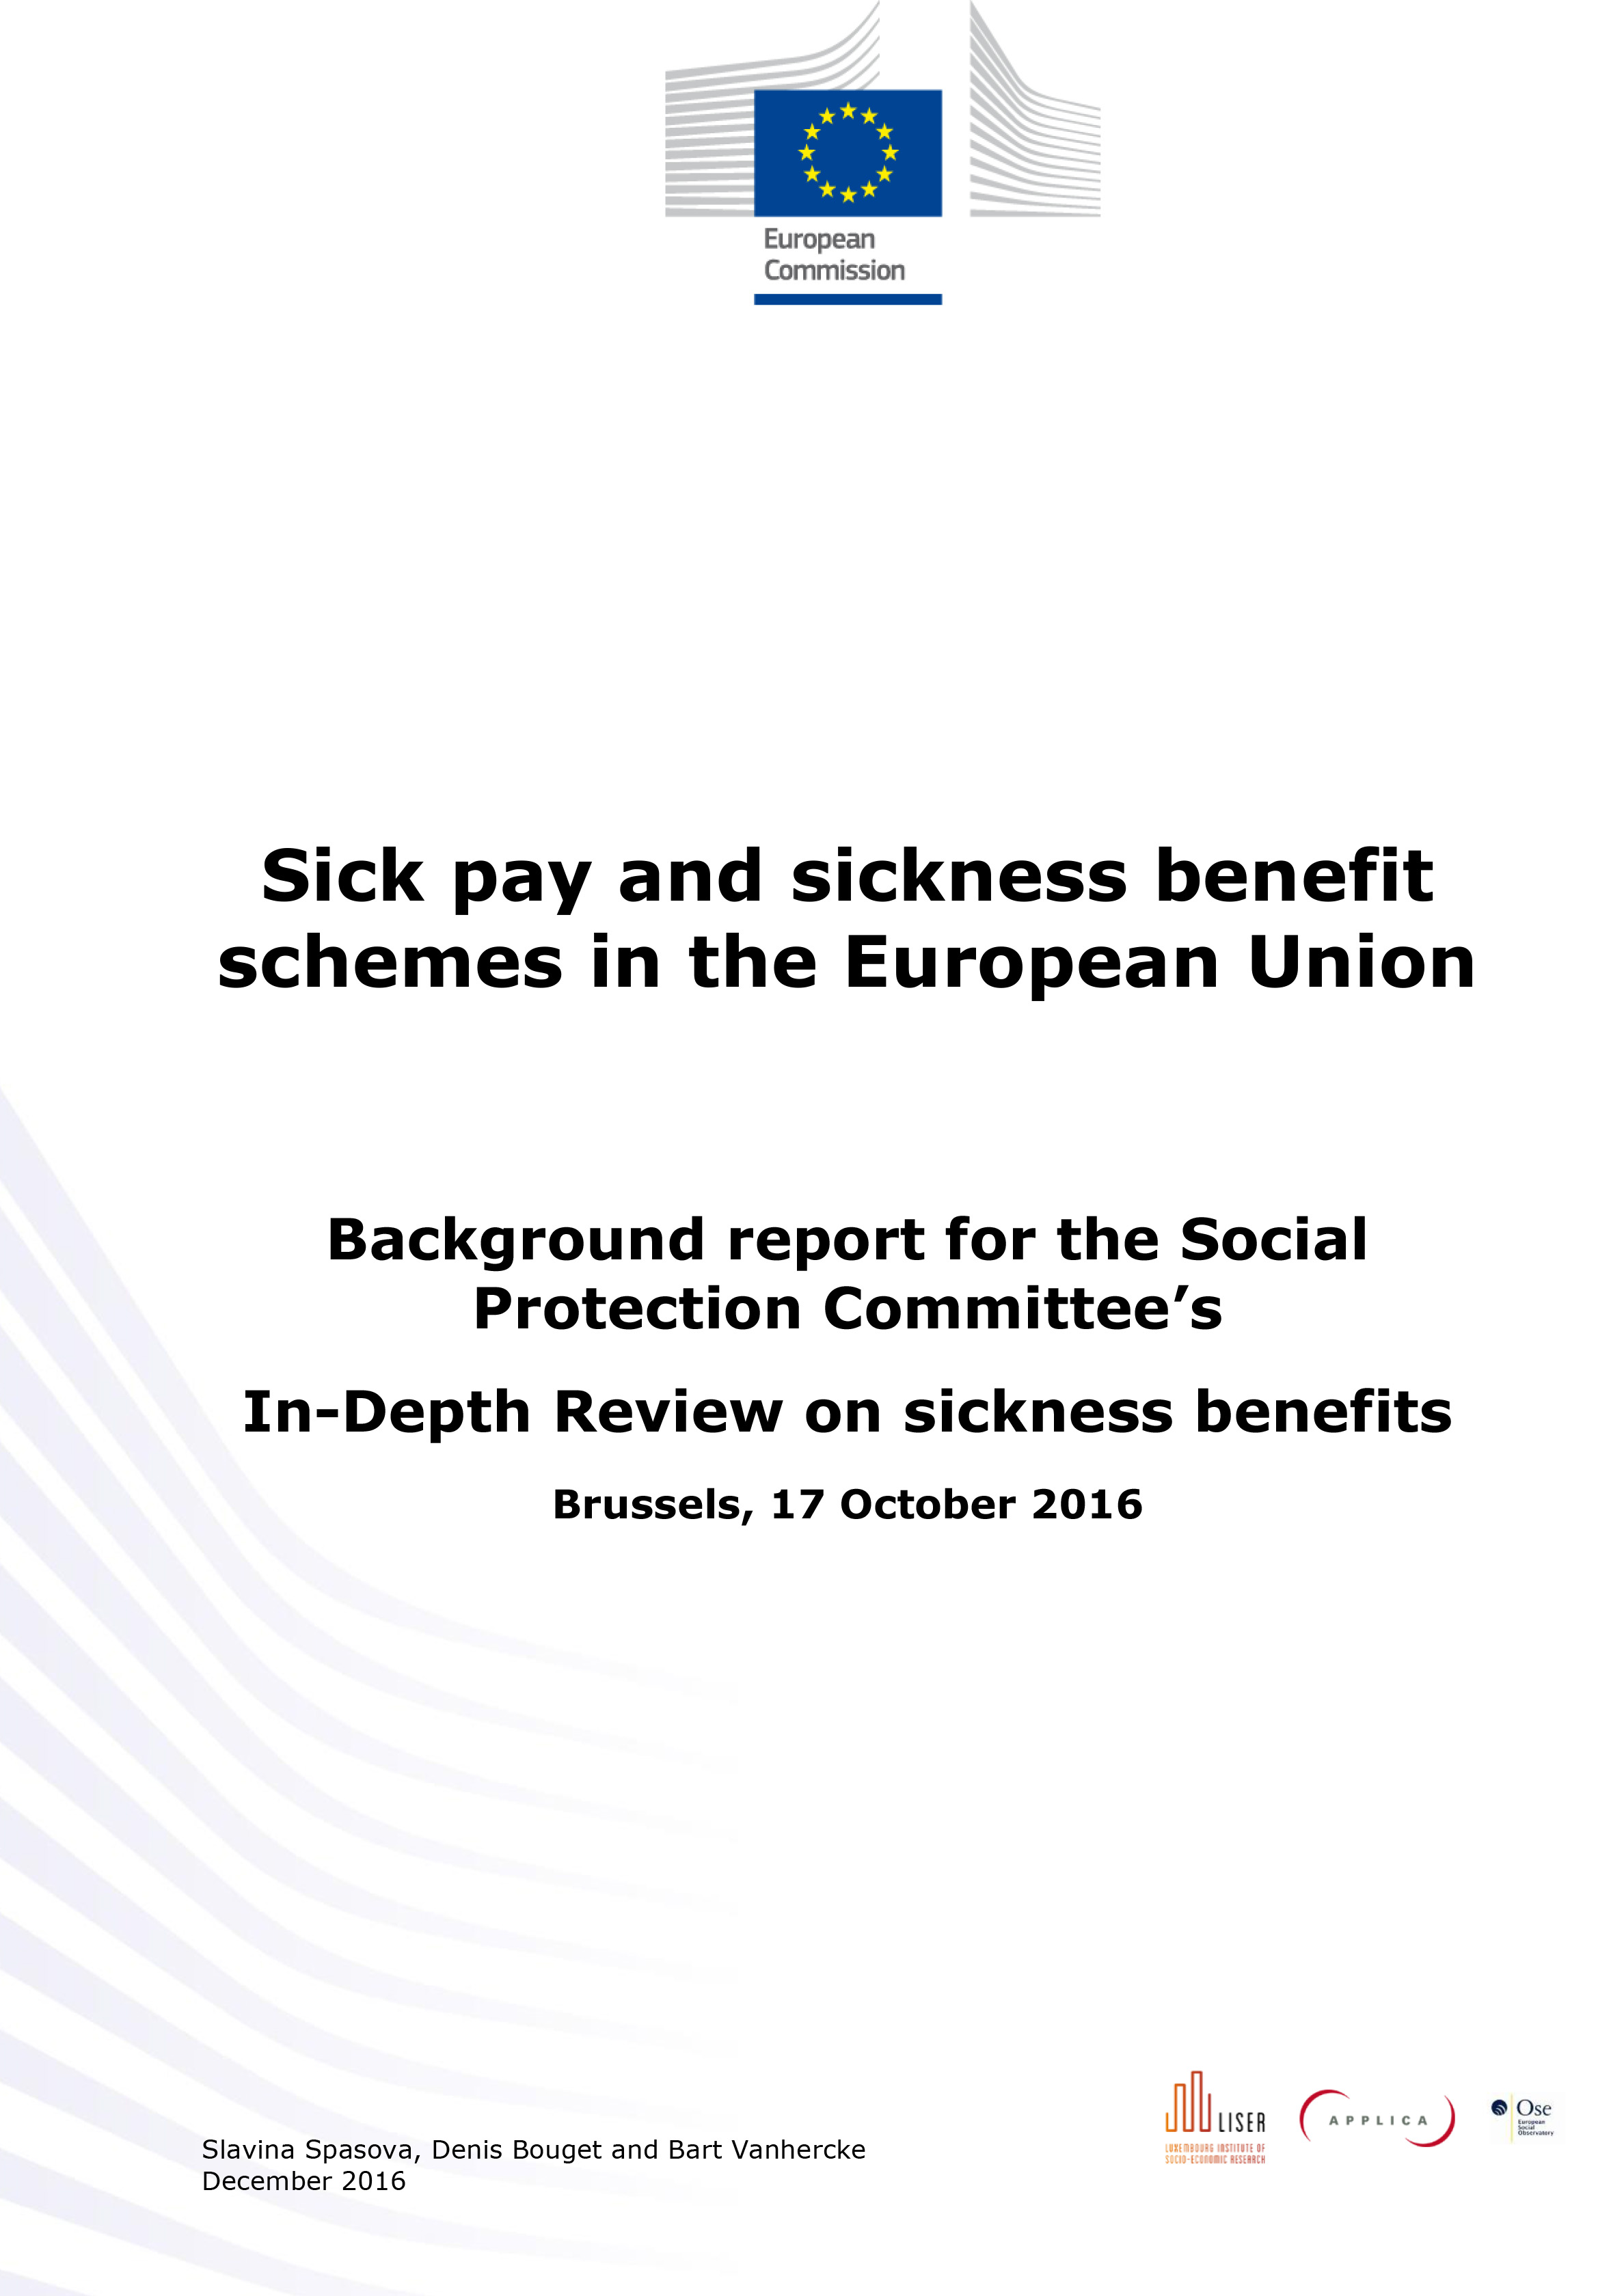 Sick pay and sickness benefit schemes in the European Union